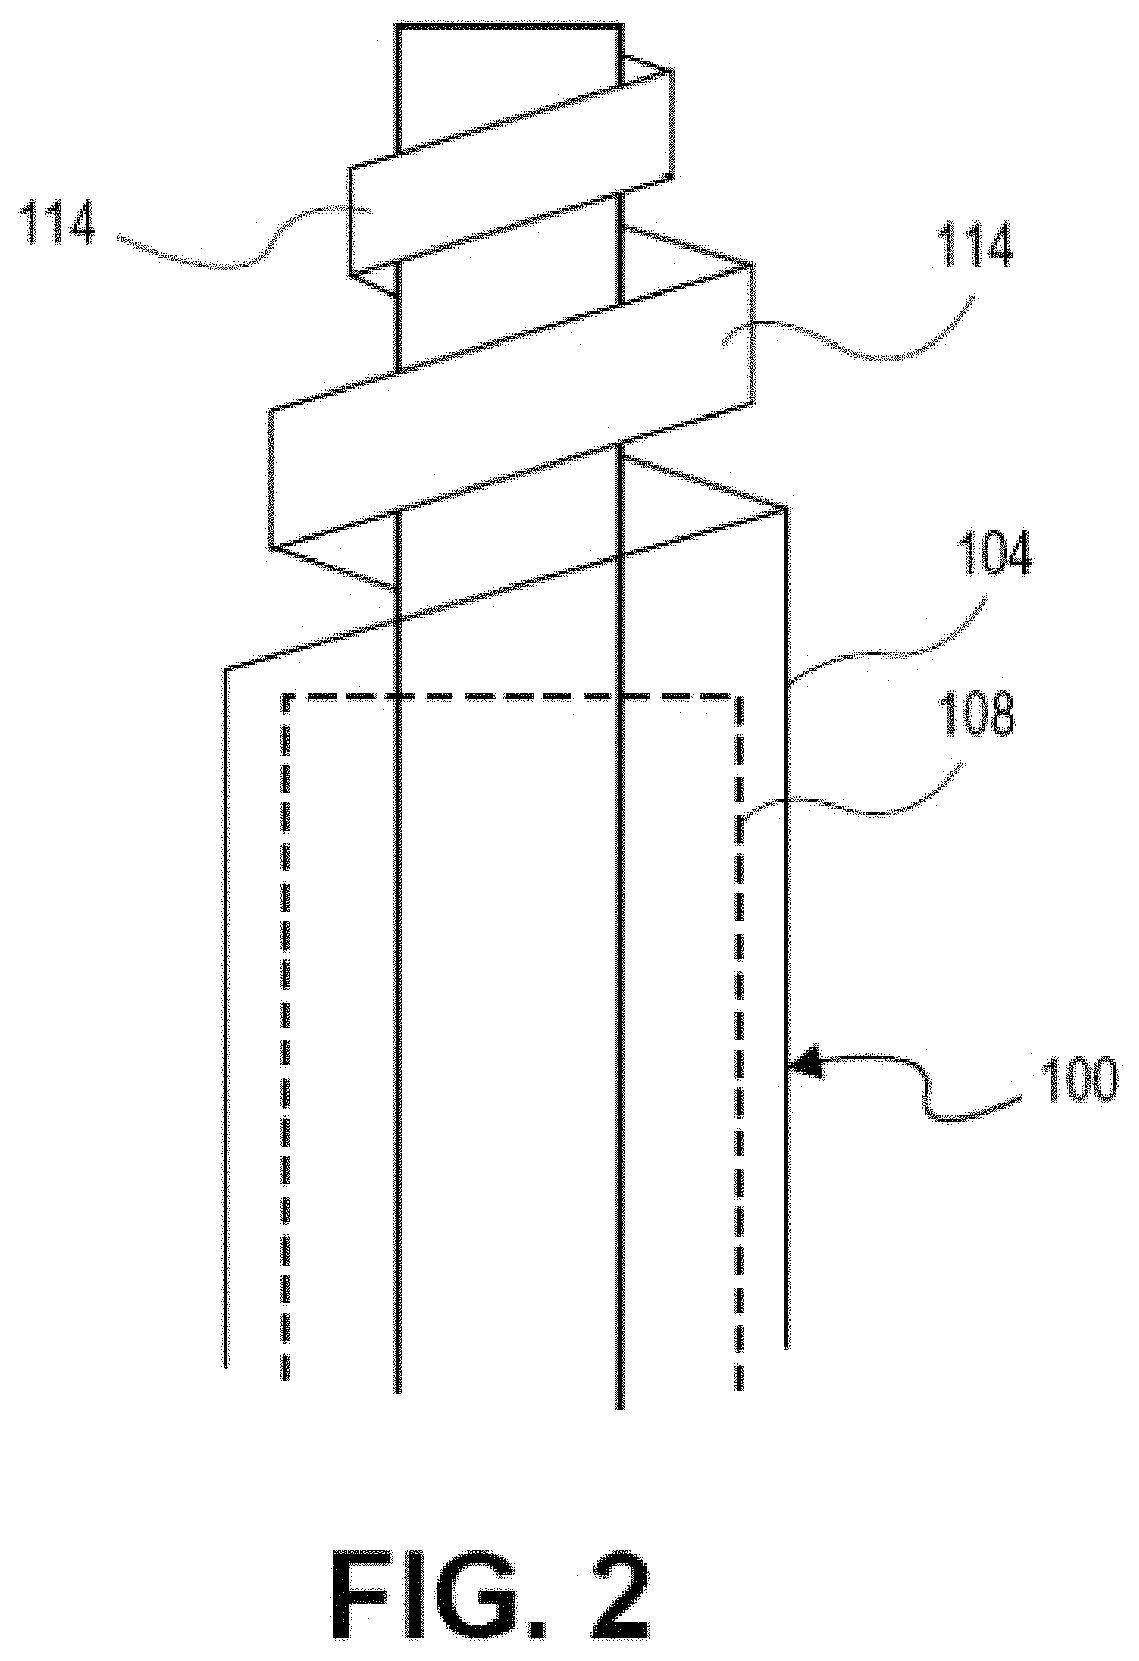 Systems and methods for establishing a nerve block